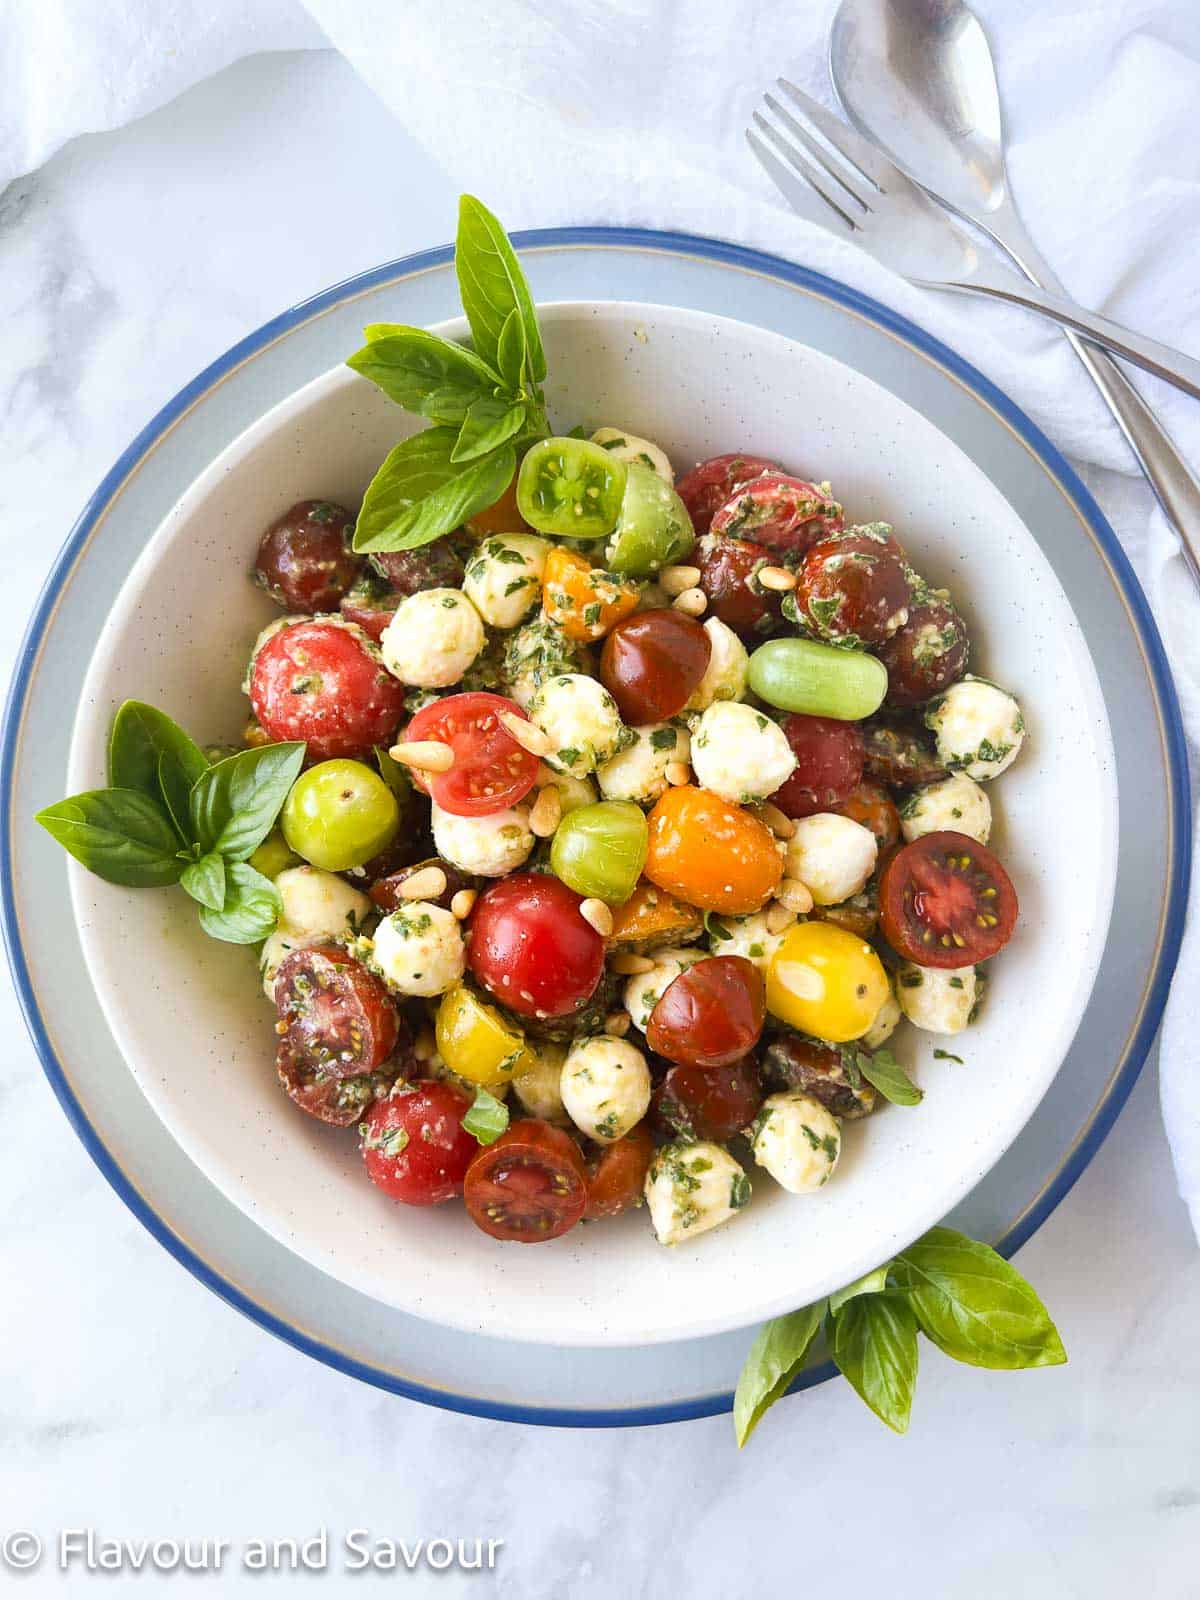 Pesto Caprese Salad with Cherry Tomatoes in a bowl without balsamic glaze.